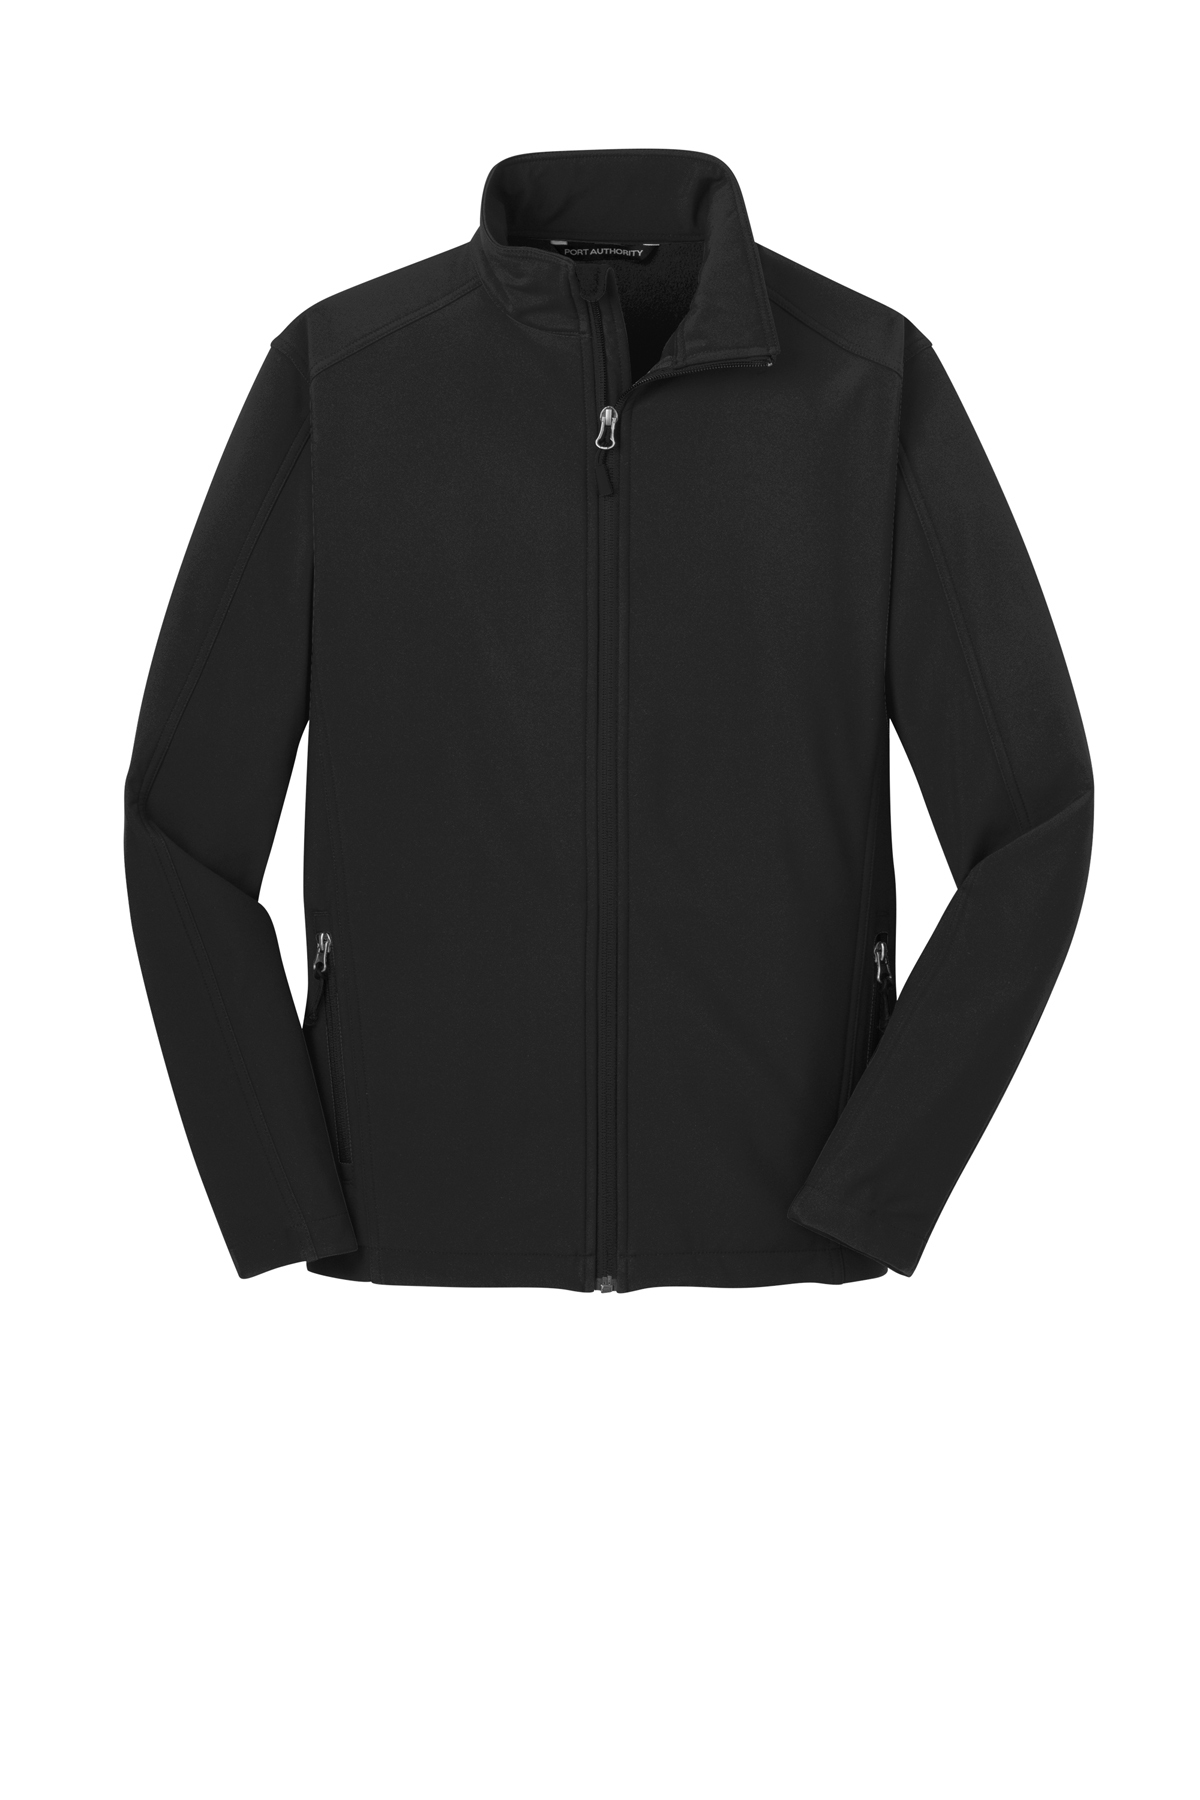 Port Authority Tall Core Soft Shell Jacket, Product